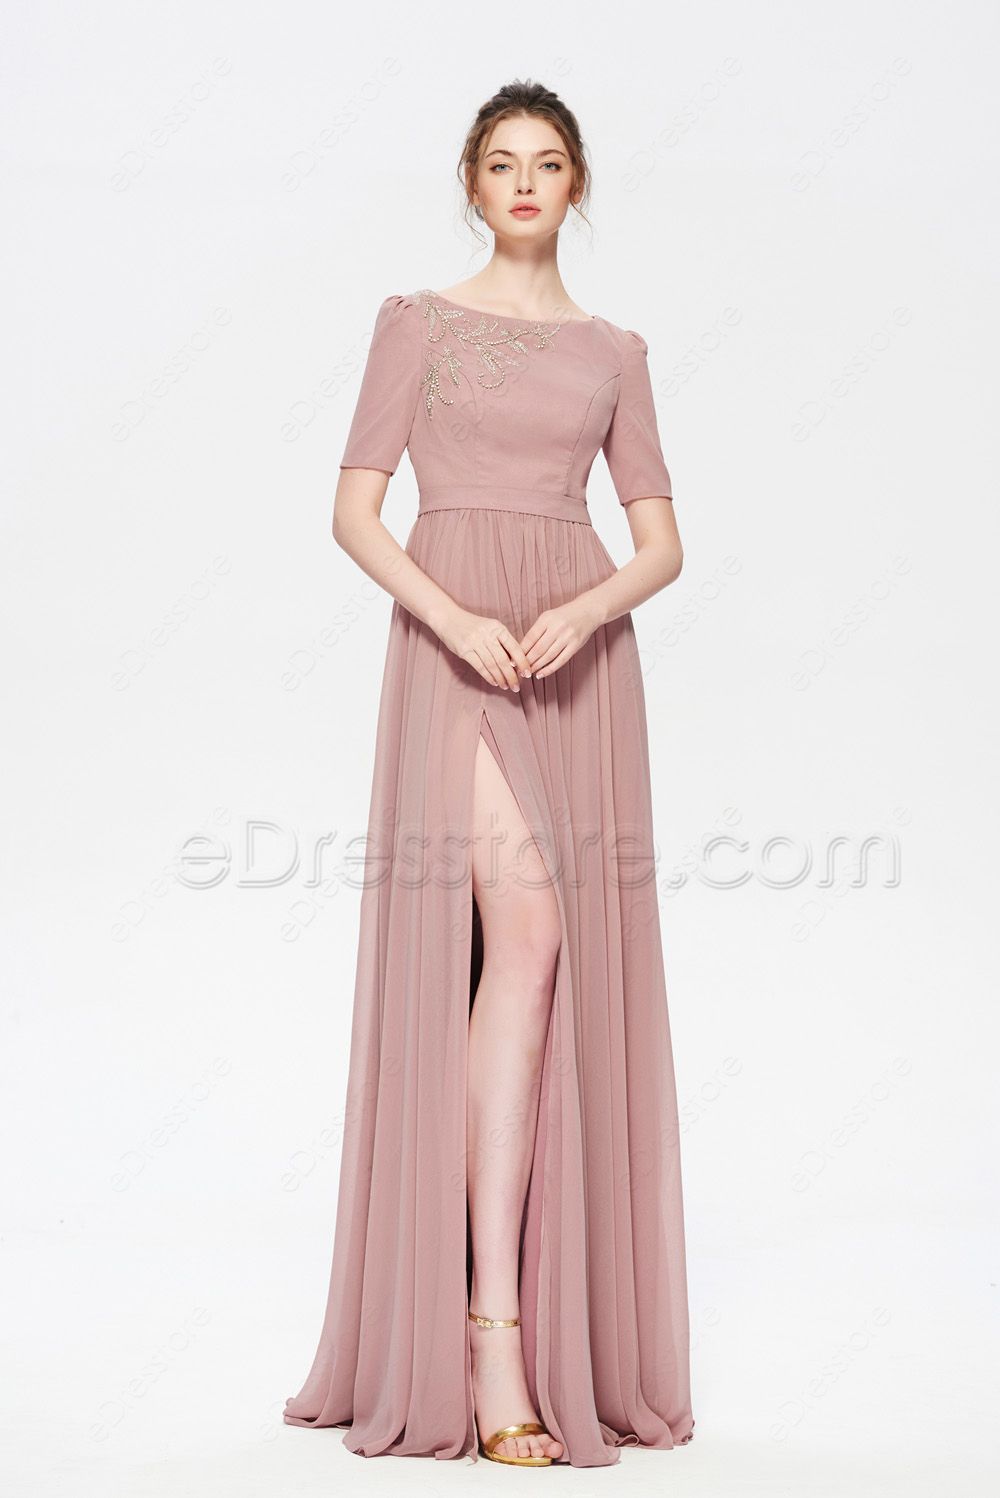 Dusty Rose Modest Beaded Bridesmaid Dress with Slit Short Sleeves ...